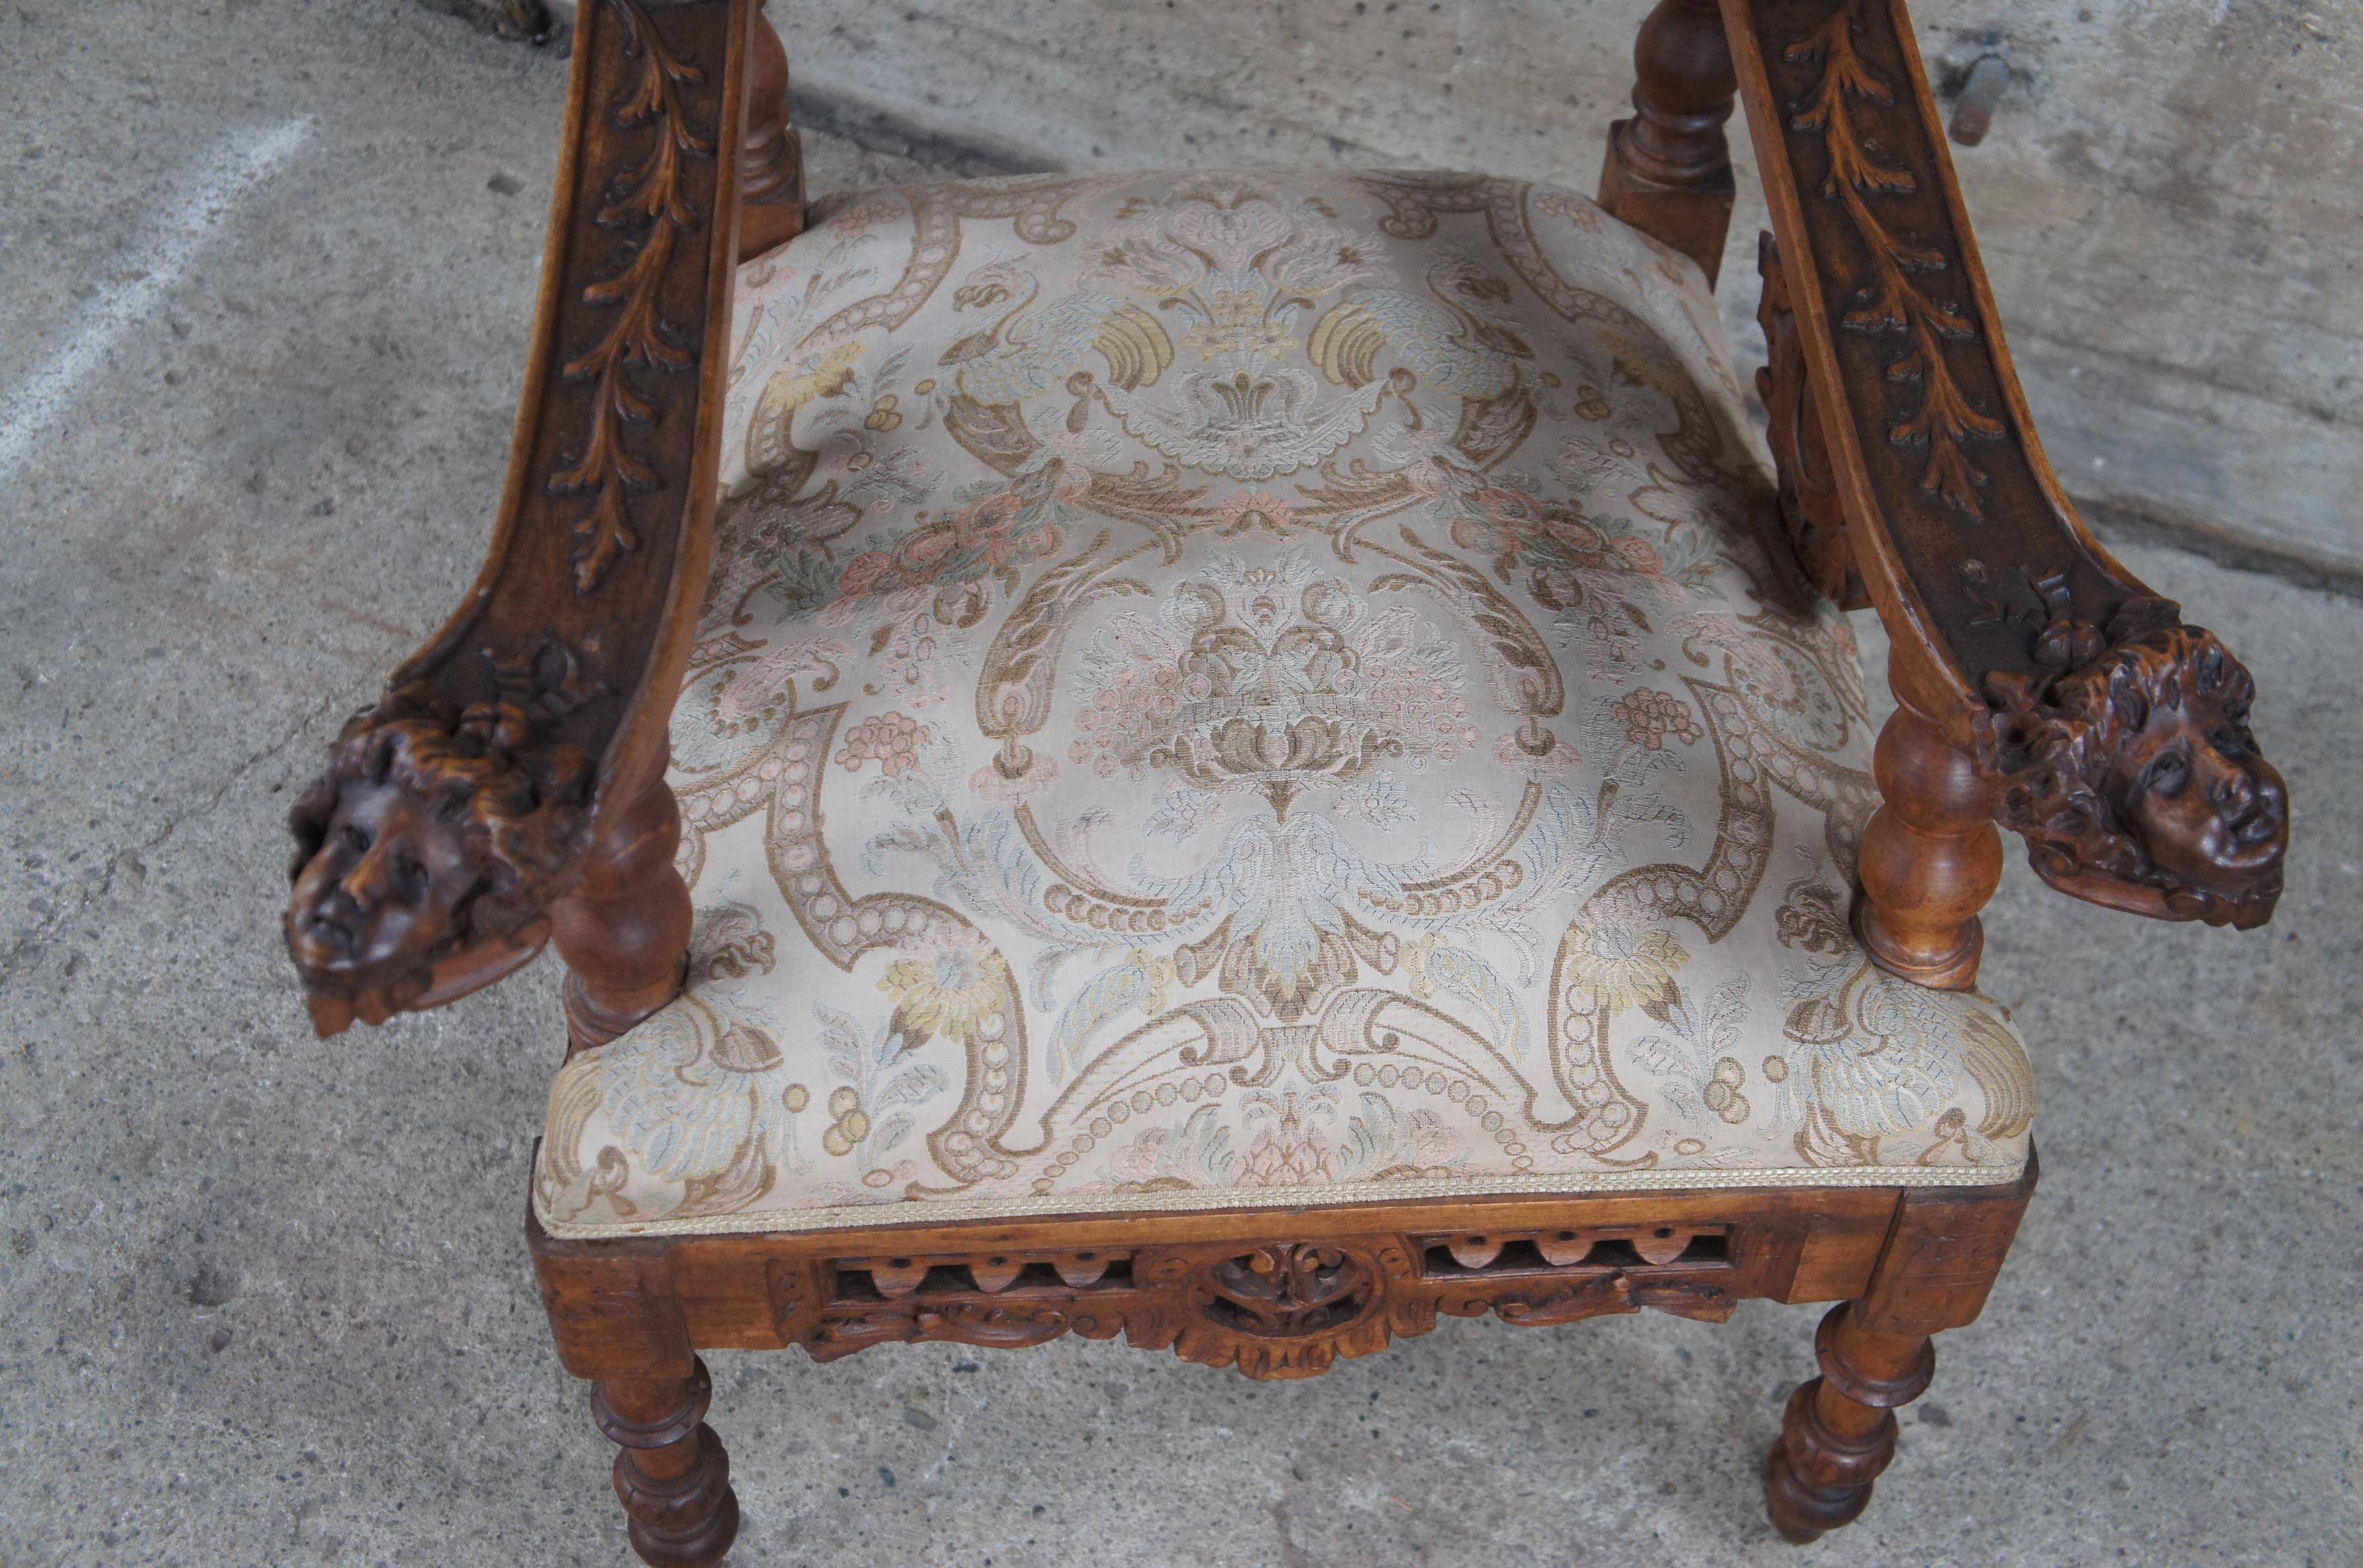 Upholstery 2 Antique 19th C Italian Renaissance Carved Walnut Putti Cherub Angel Arm Chairs For Sale